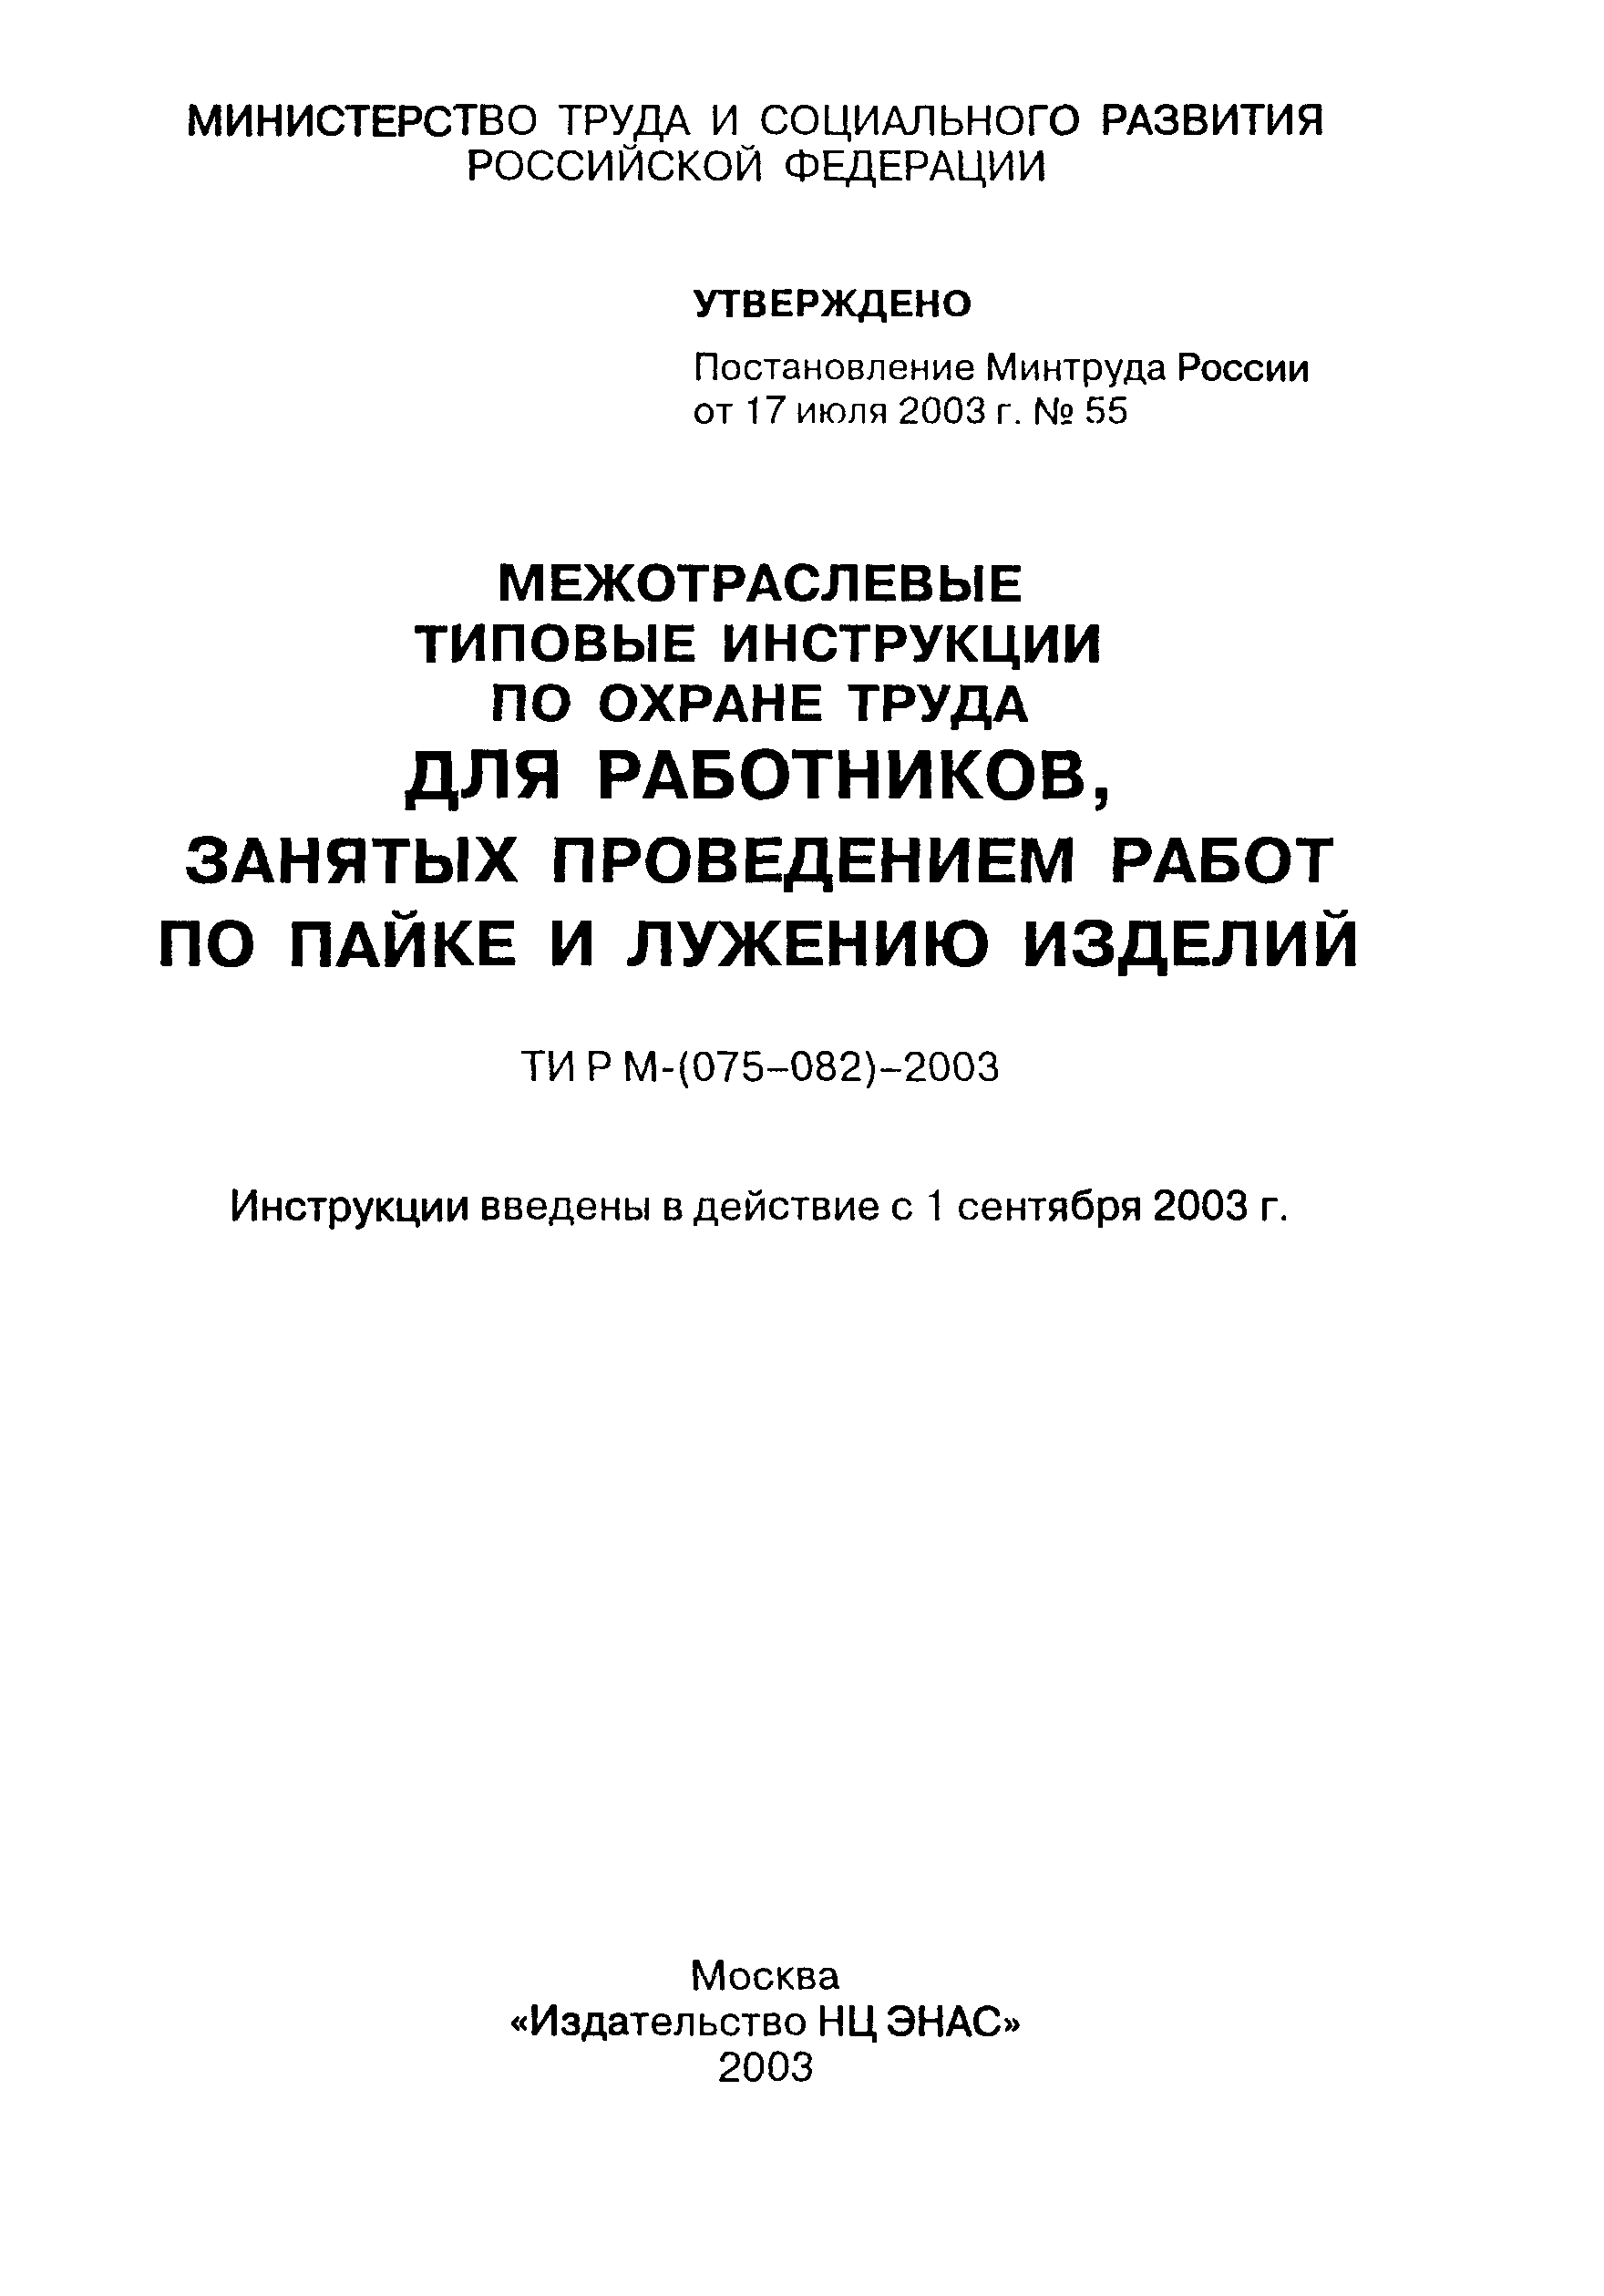 ТИ Р М-076-2003